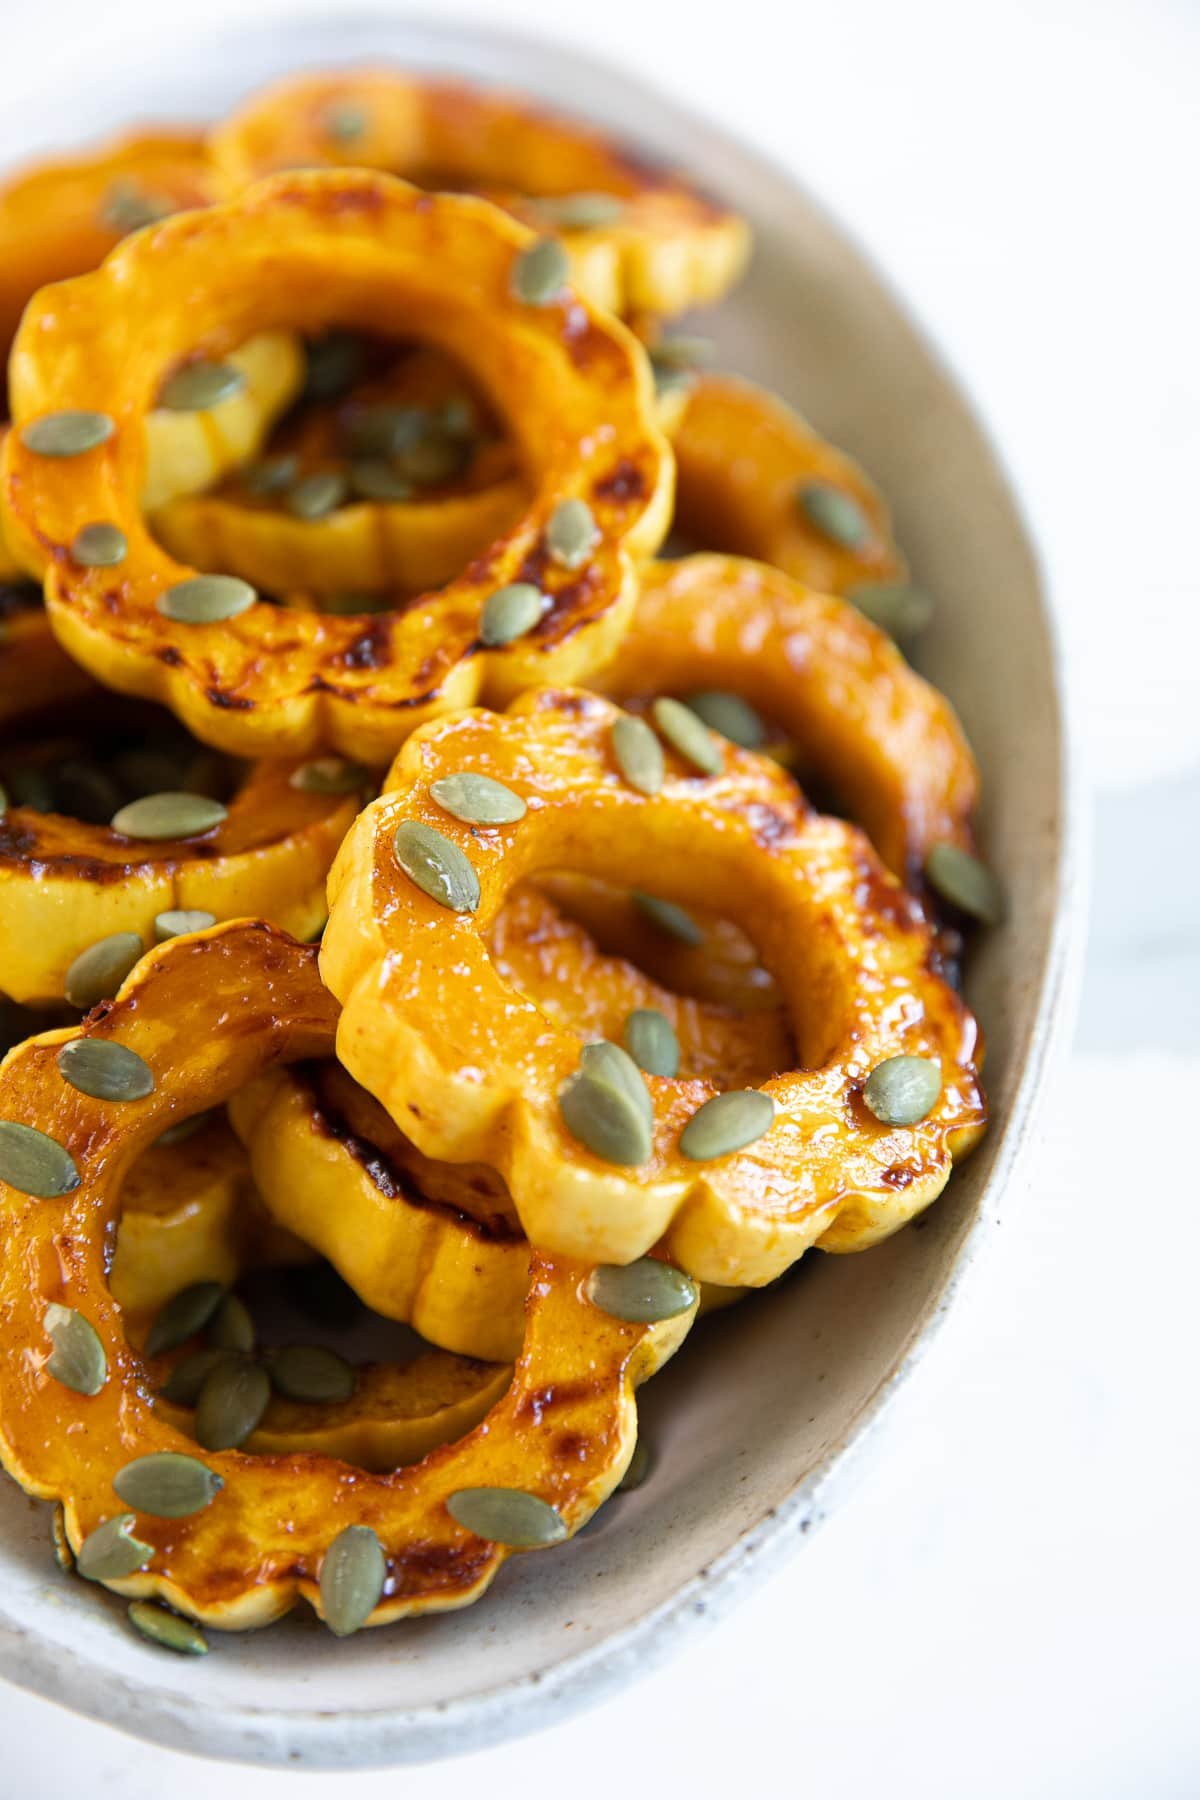 White platter filled with roasted delicata squash rings roasted in maple syrup, cinnamon, and sprinkled with pepitas.